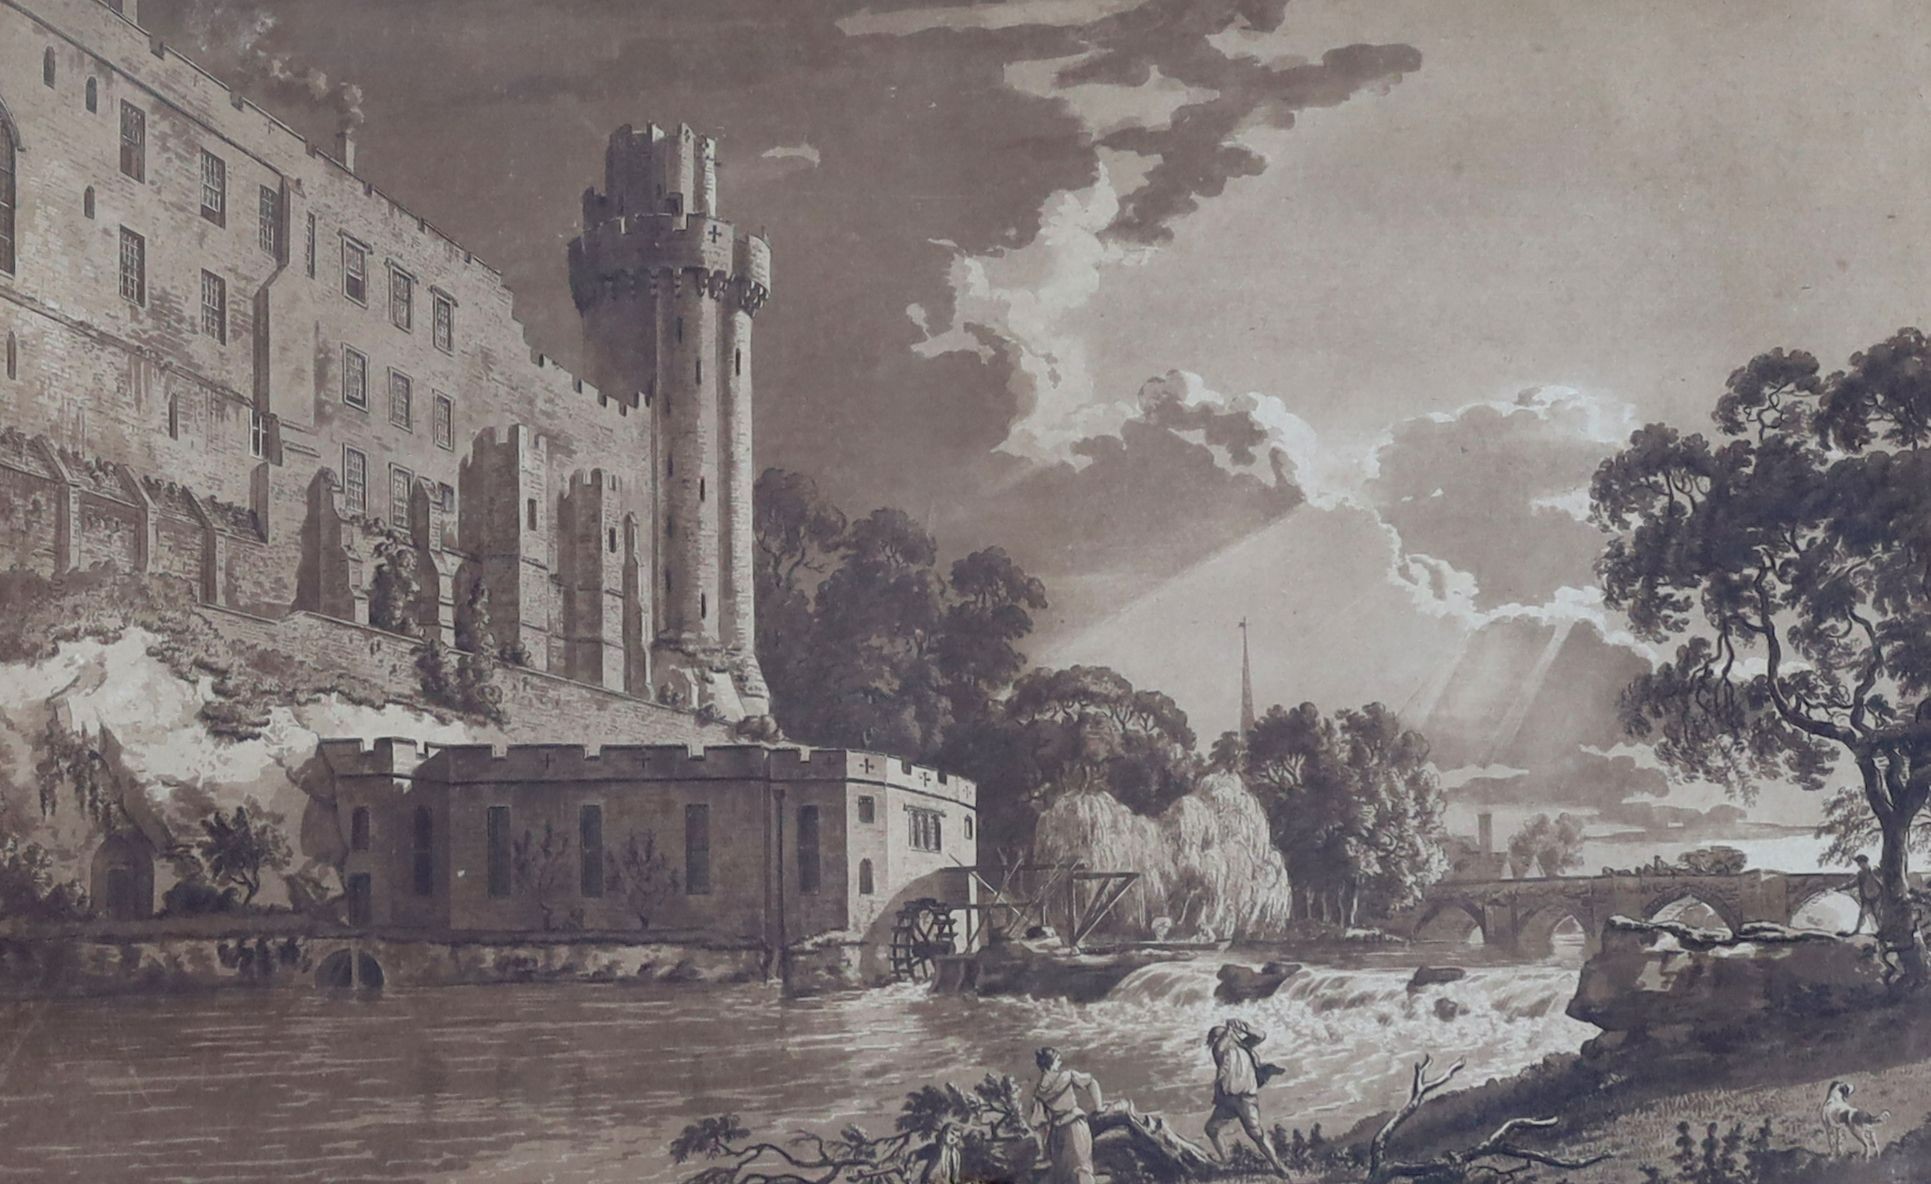 Paul Sandby RA (1730-1809), Warwick Castle, c.1775, watercolour and ink en grisaille, signed and dated 1775., 29 x 45cm